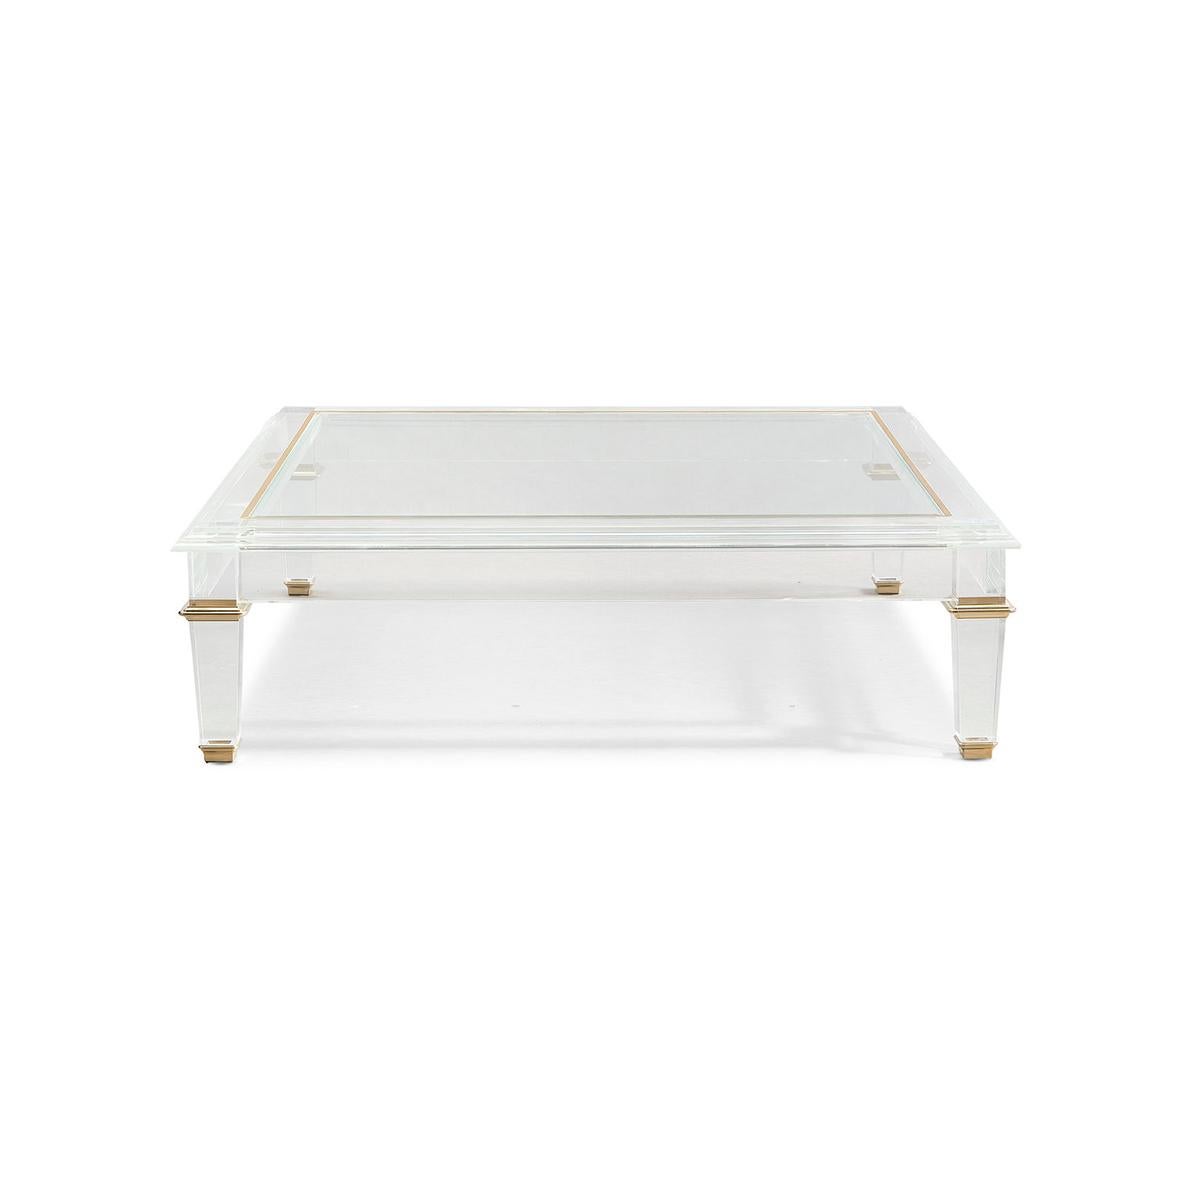 French Neo Classic 18th-century inspired design with clean and classic lines, this cocktail table comes to life in crisp acrylic.

The table’s surface features a glass top and the tapered acrylic legs are accentuated with polished brass collars and